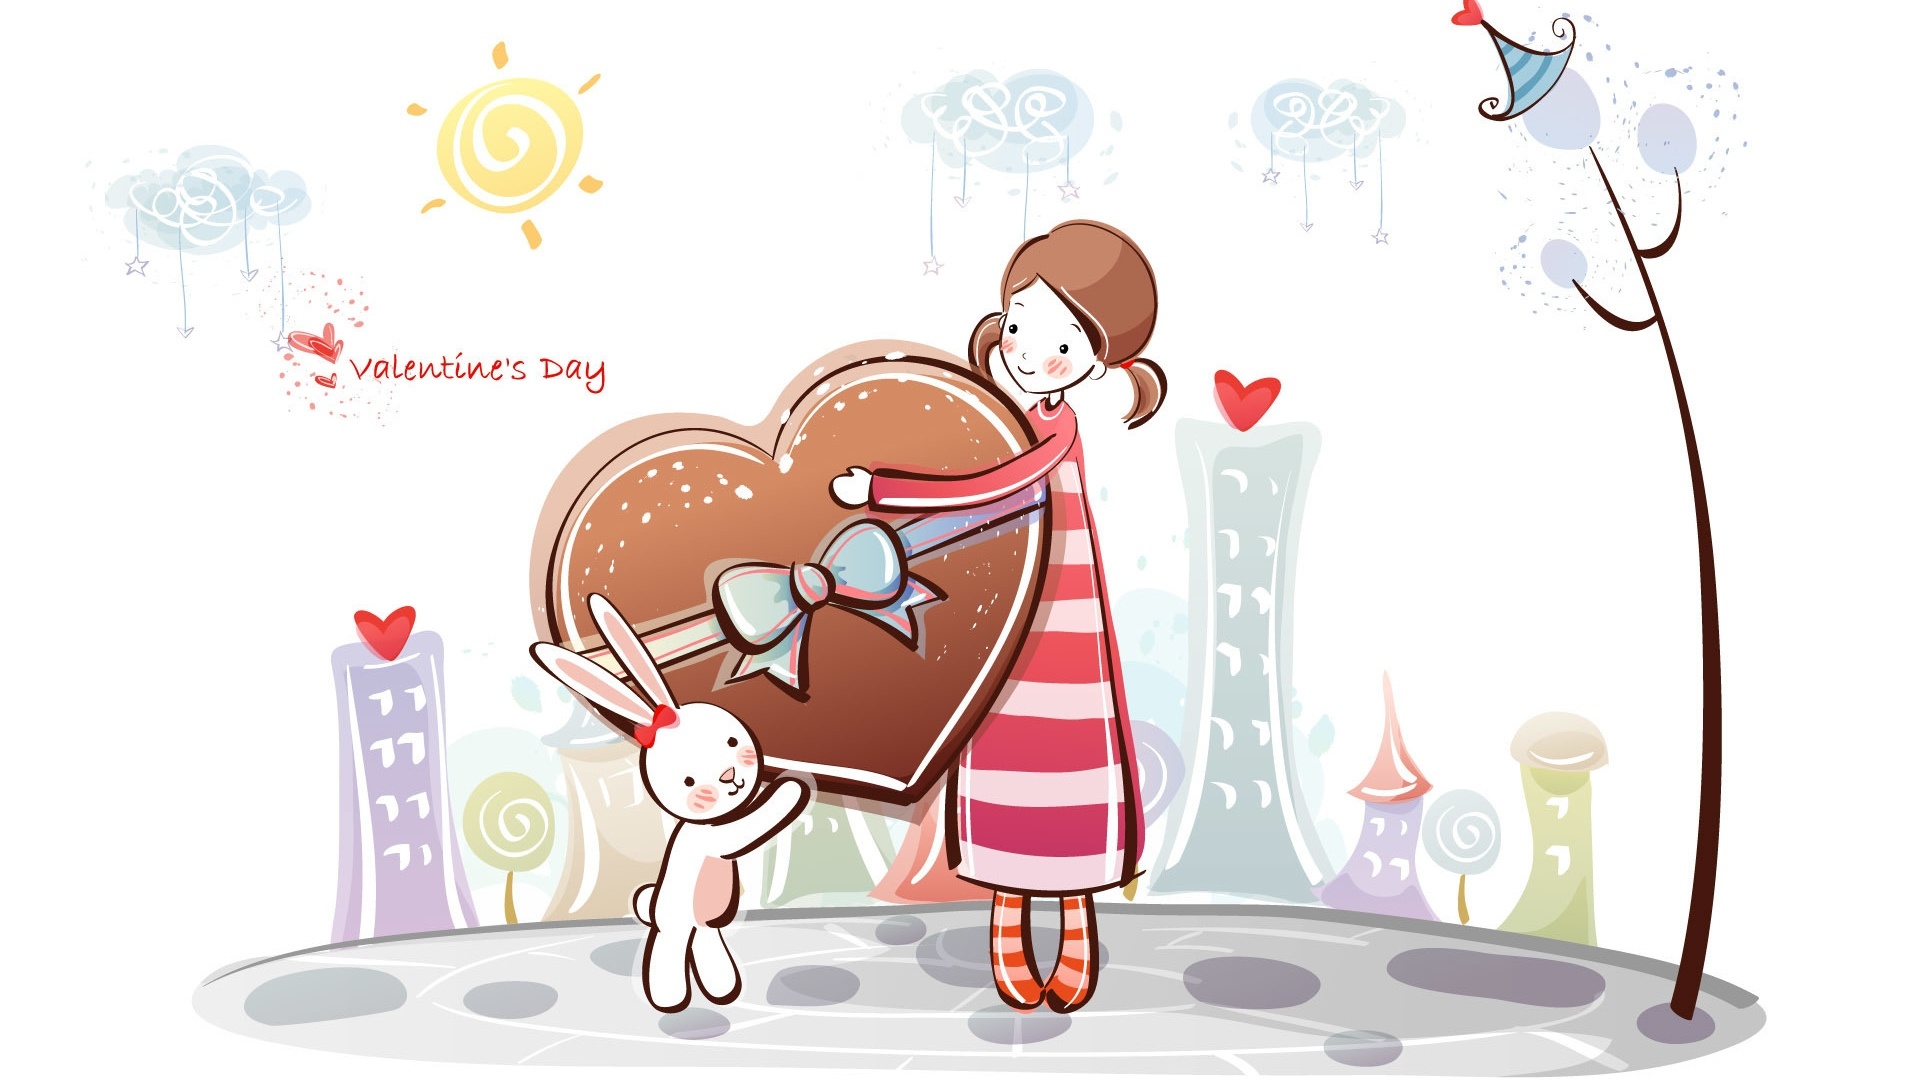 Valentines Day Illustration background picture